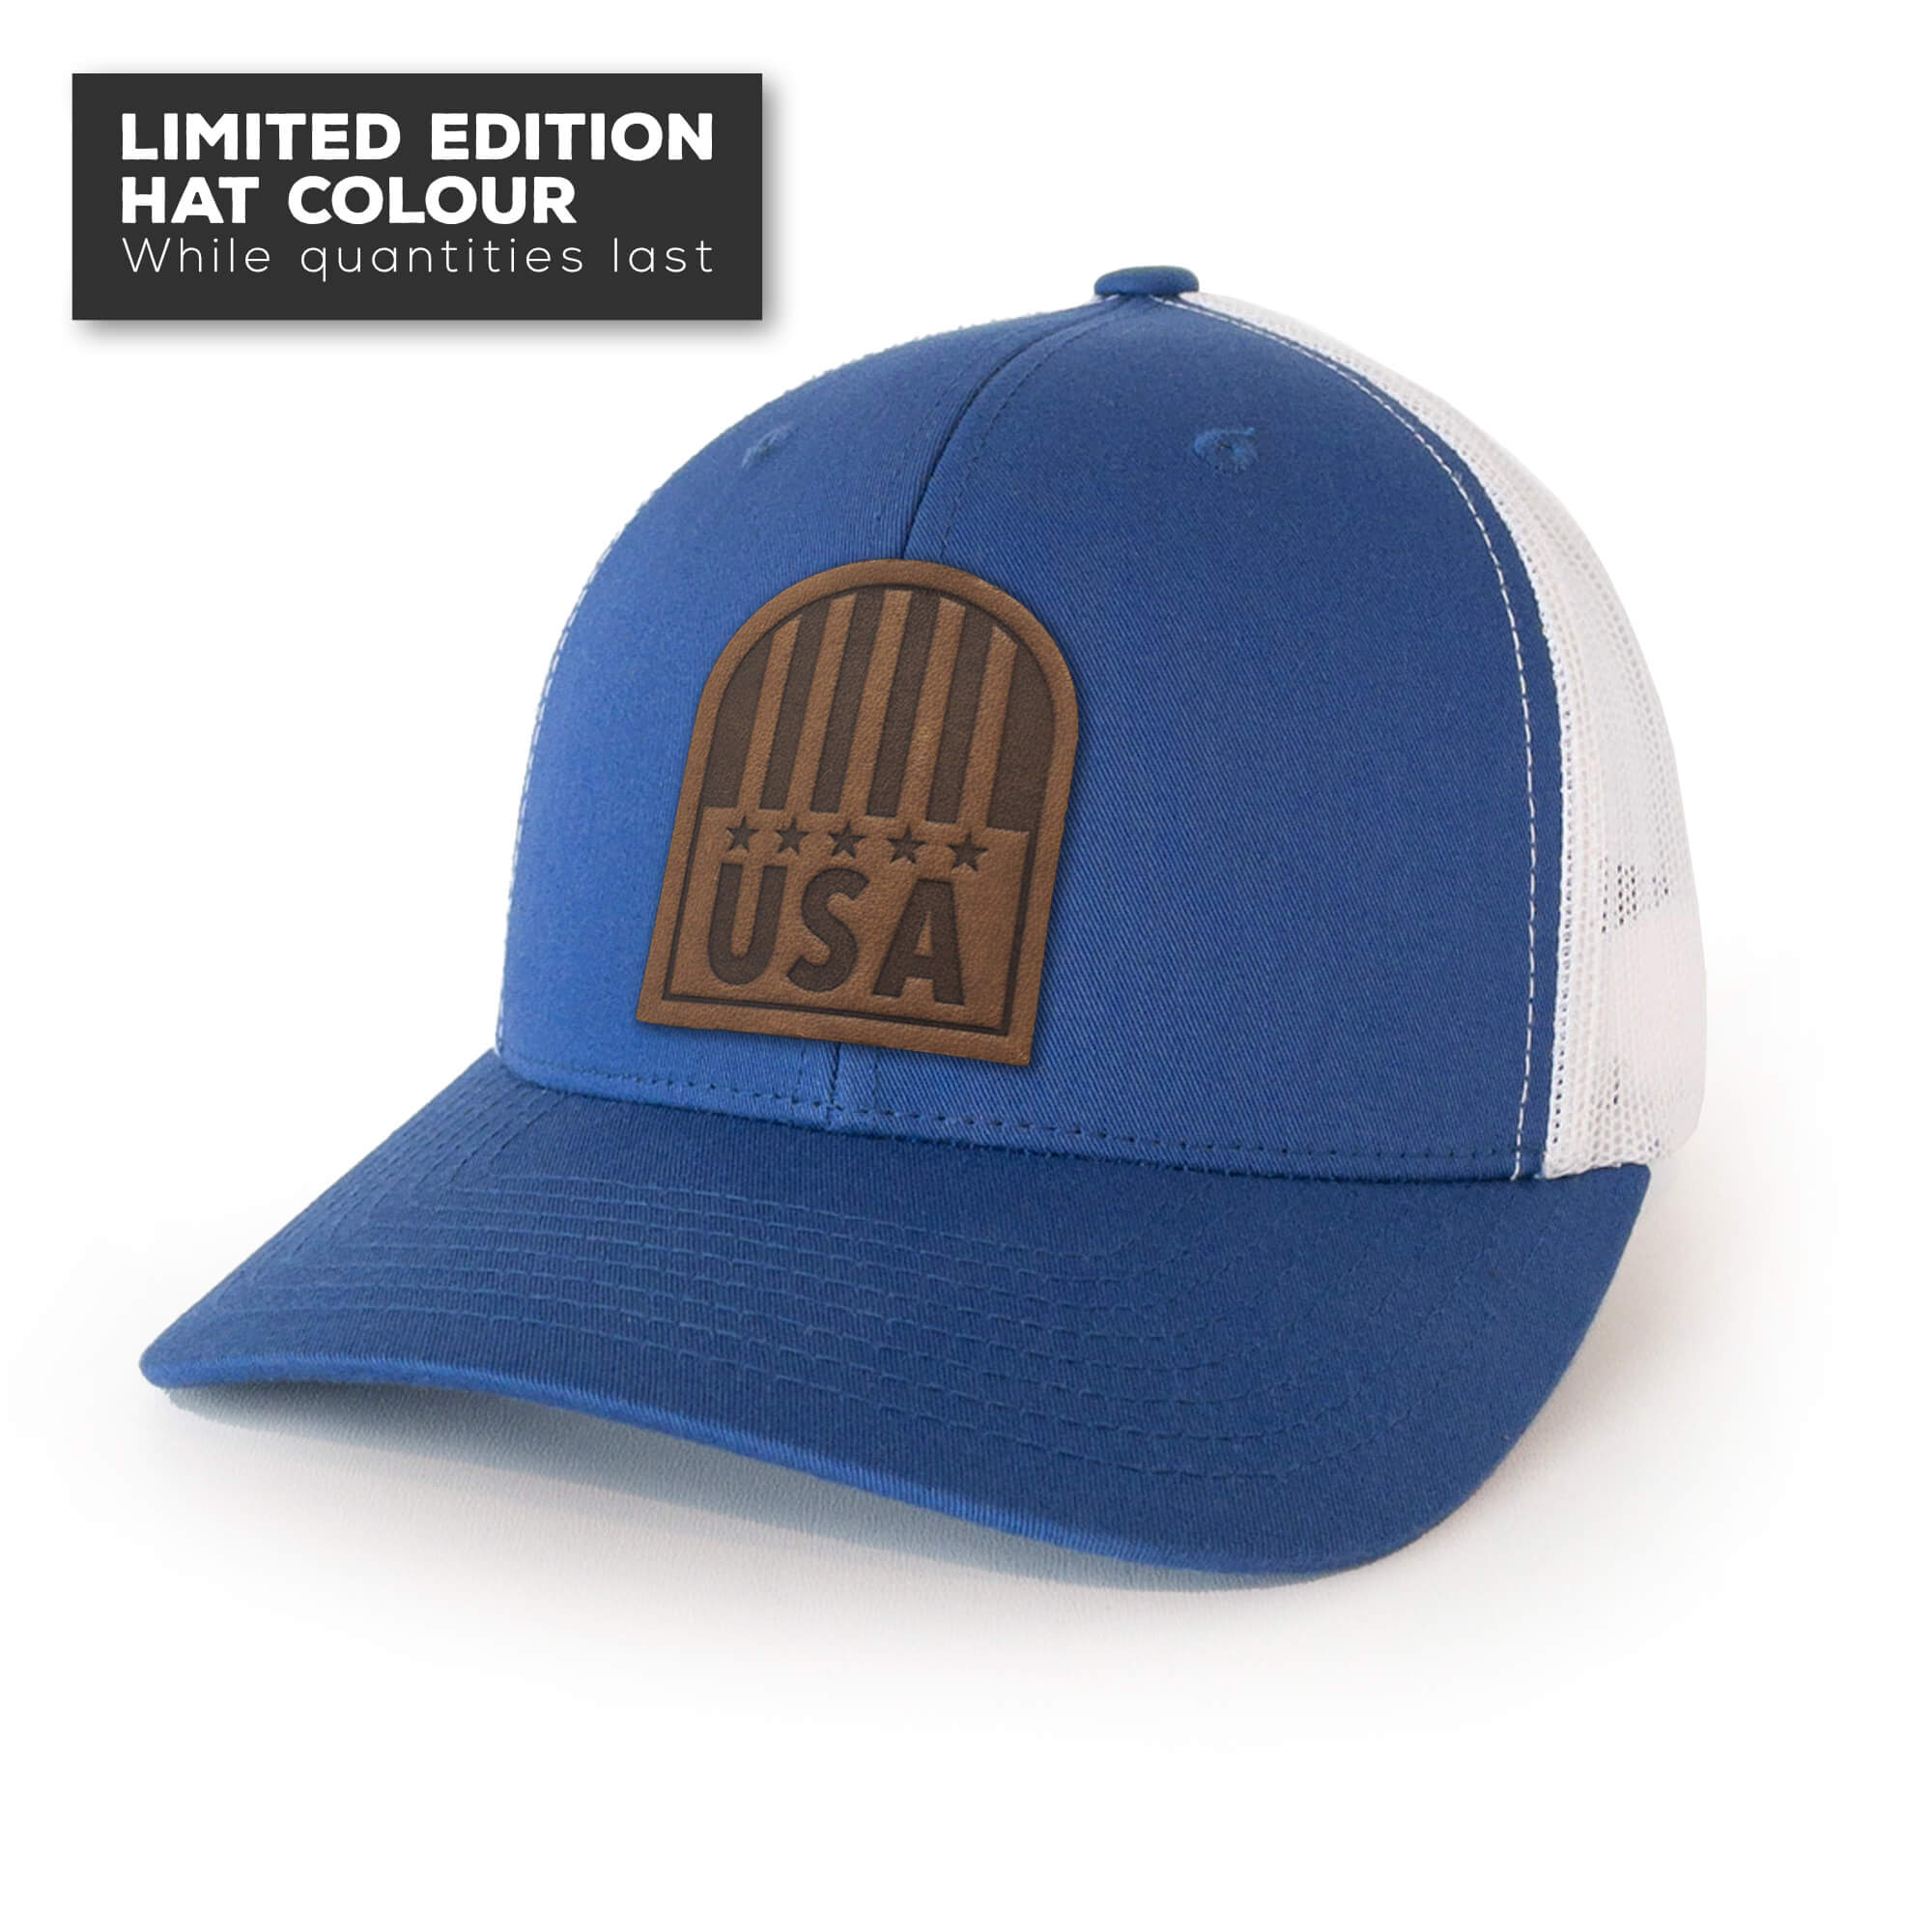 Royal Blue trucker hat with full-grain leather patch of USA Crest